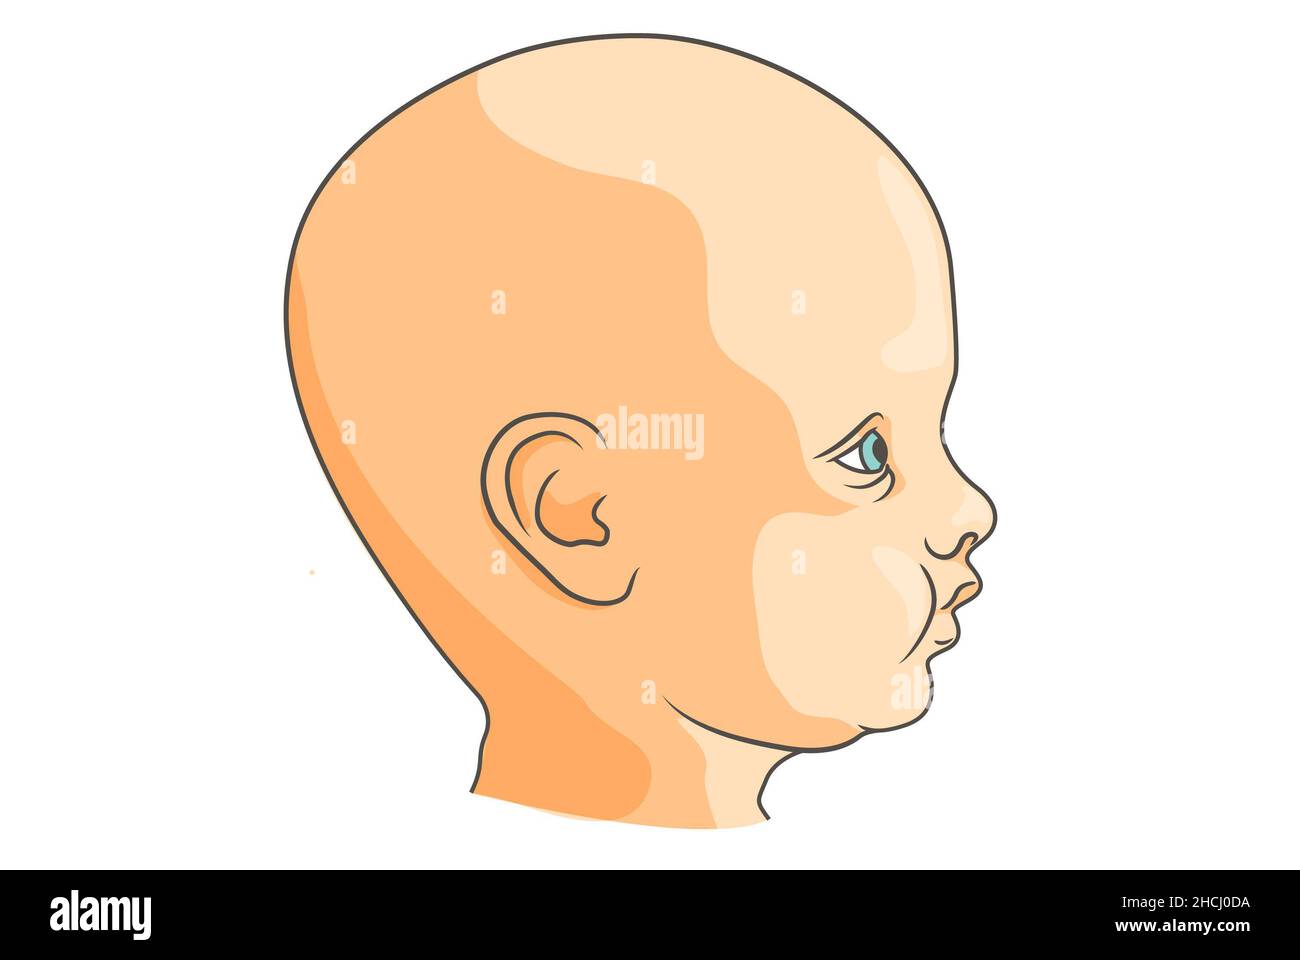 Simple illustration of an infants head from the lateral view, blue eyes. Stock Photo